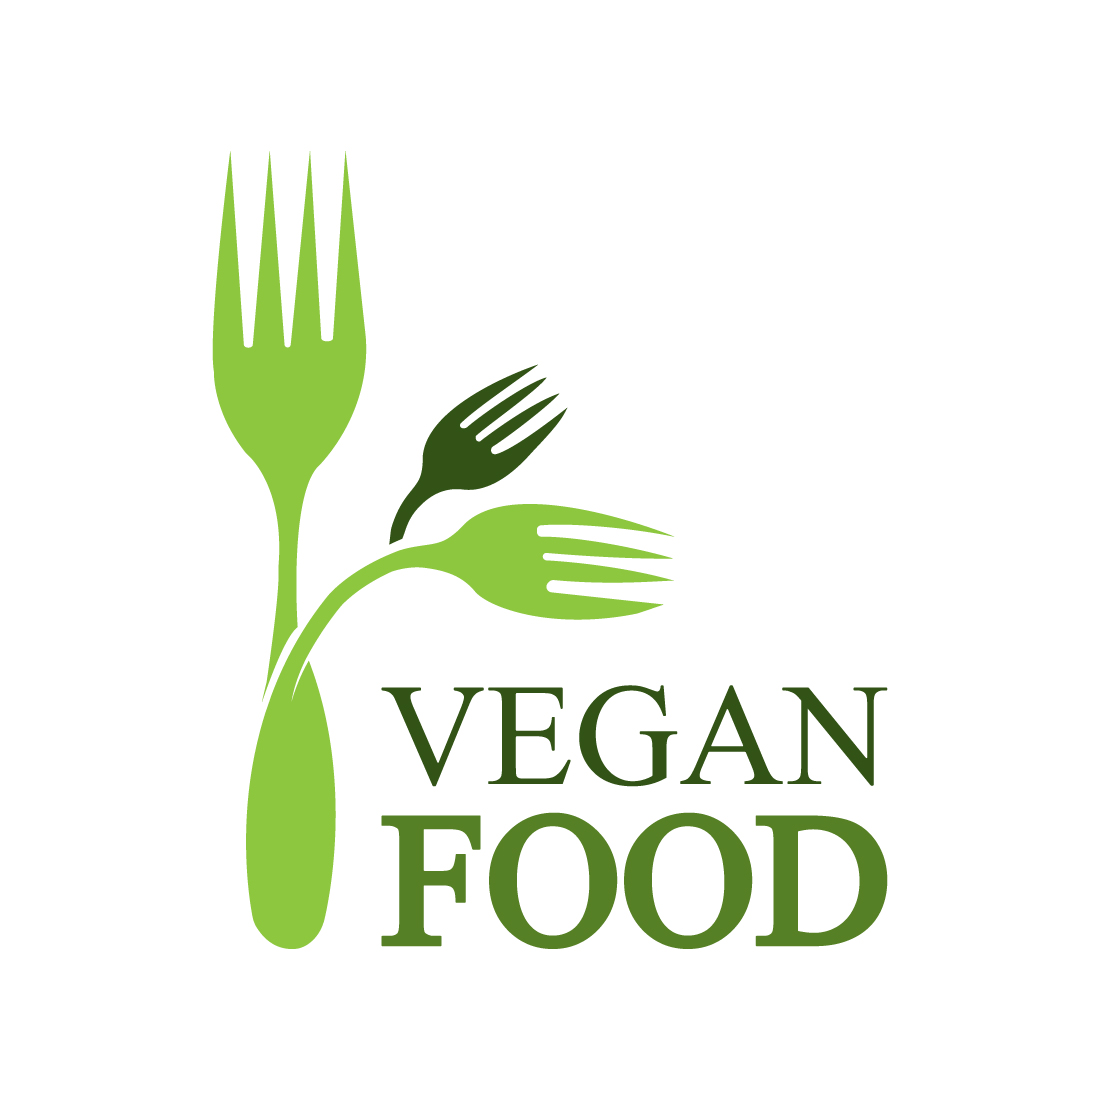 Natural Vegan food logo design vector images Organic food logo design Best Natural food logo best icon template illustration Chinees food best icon design cover image.